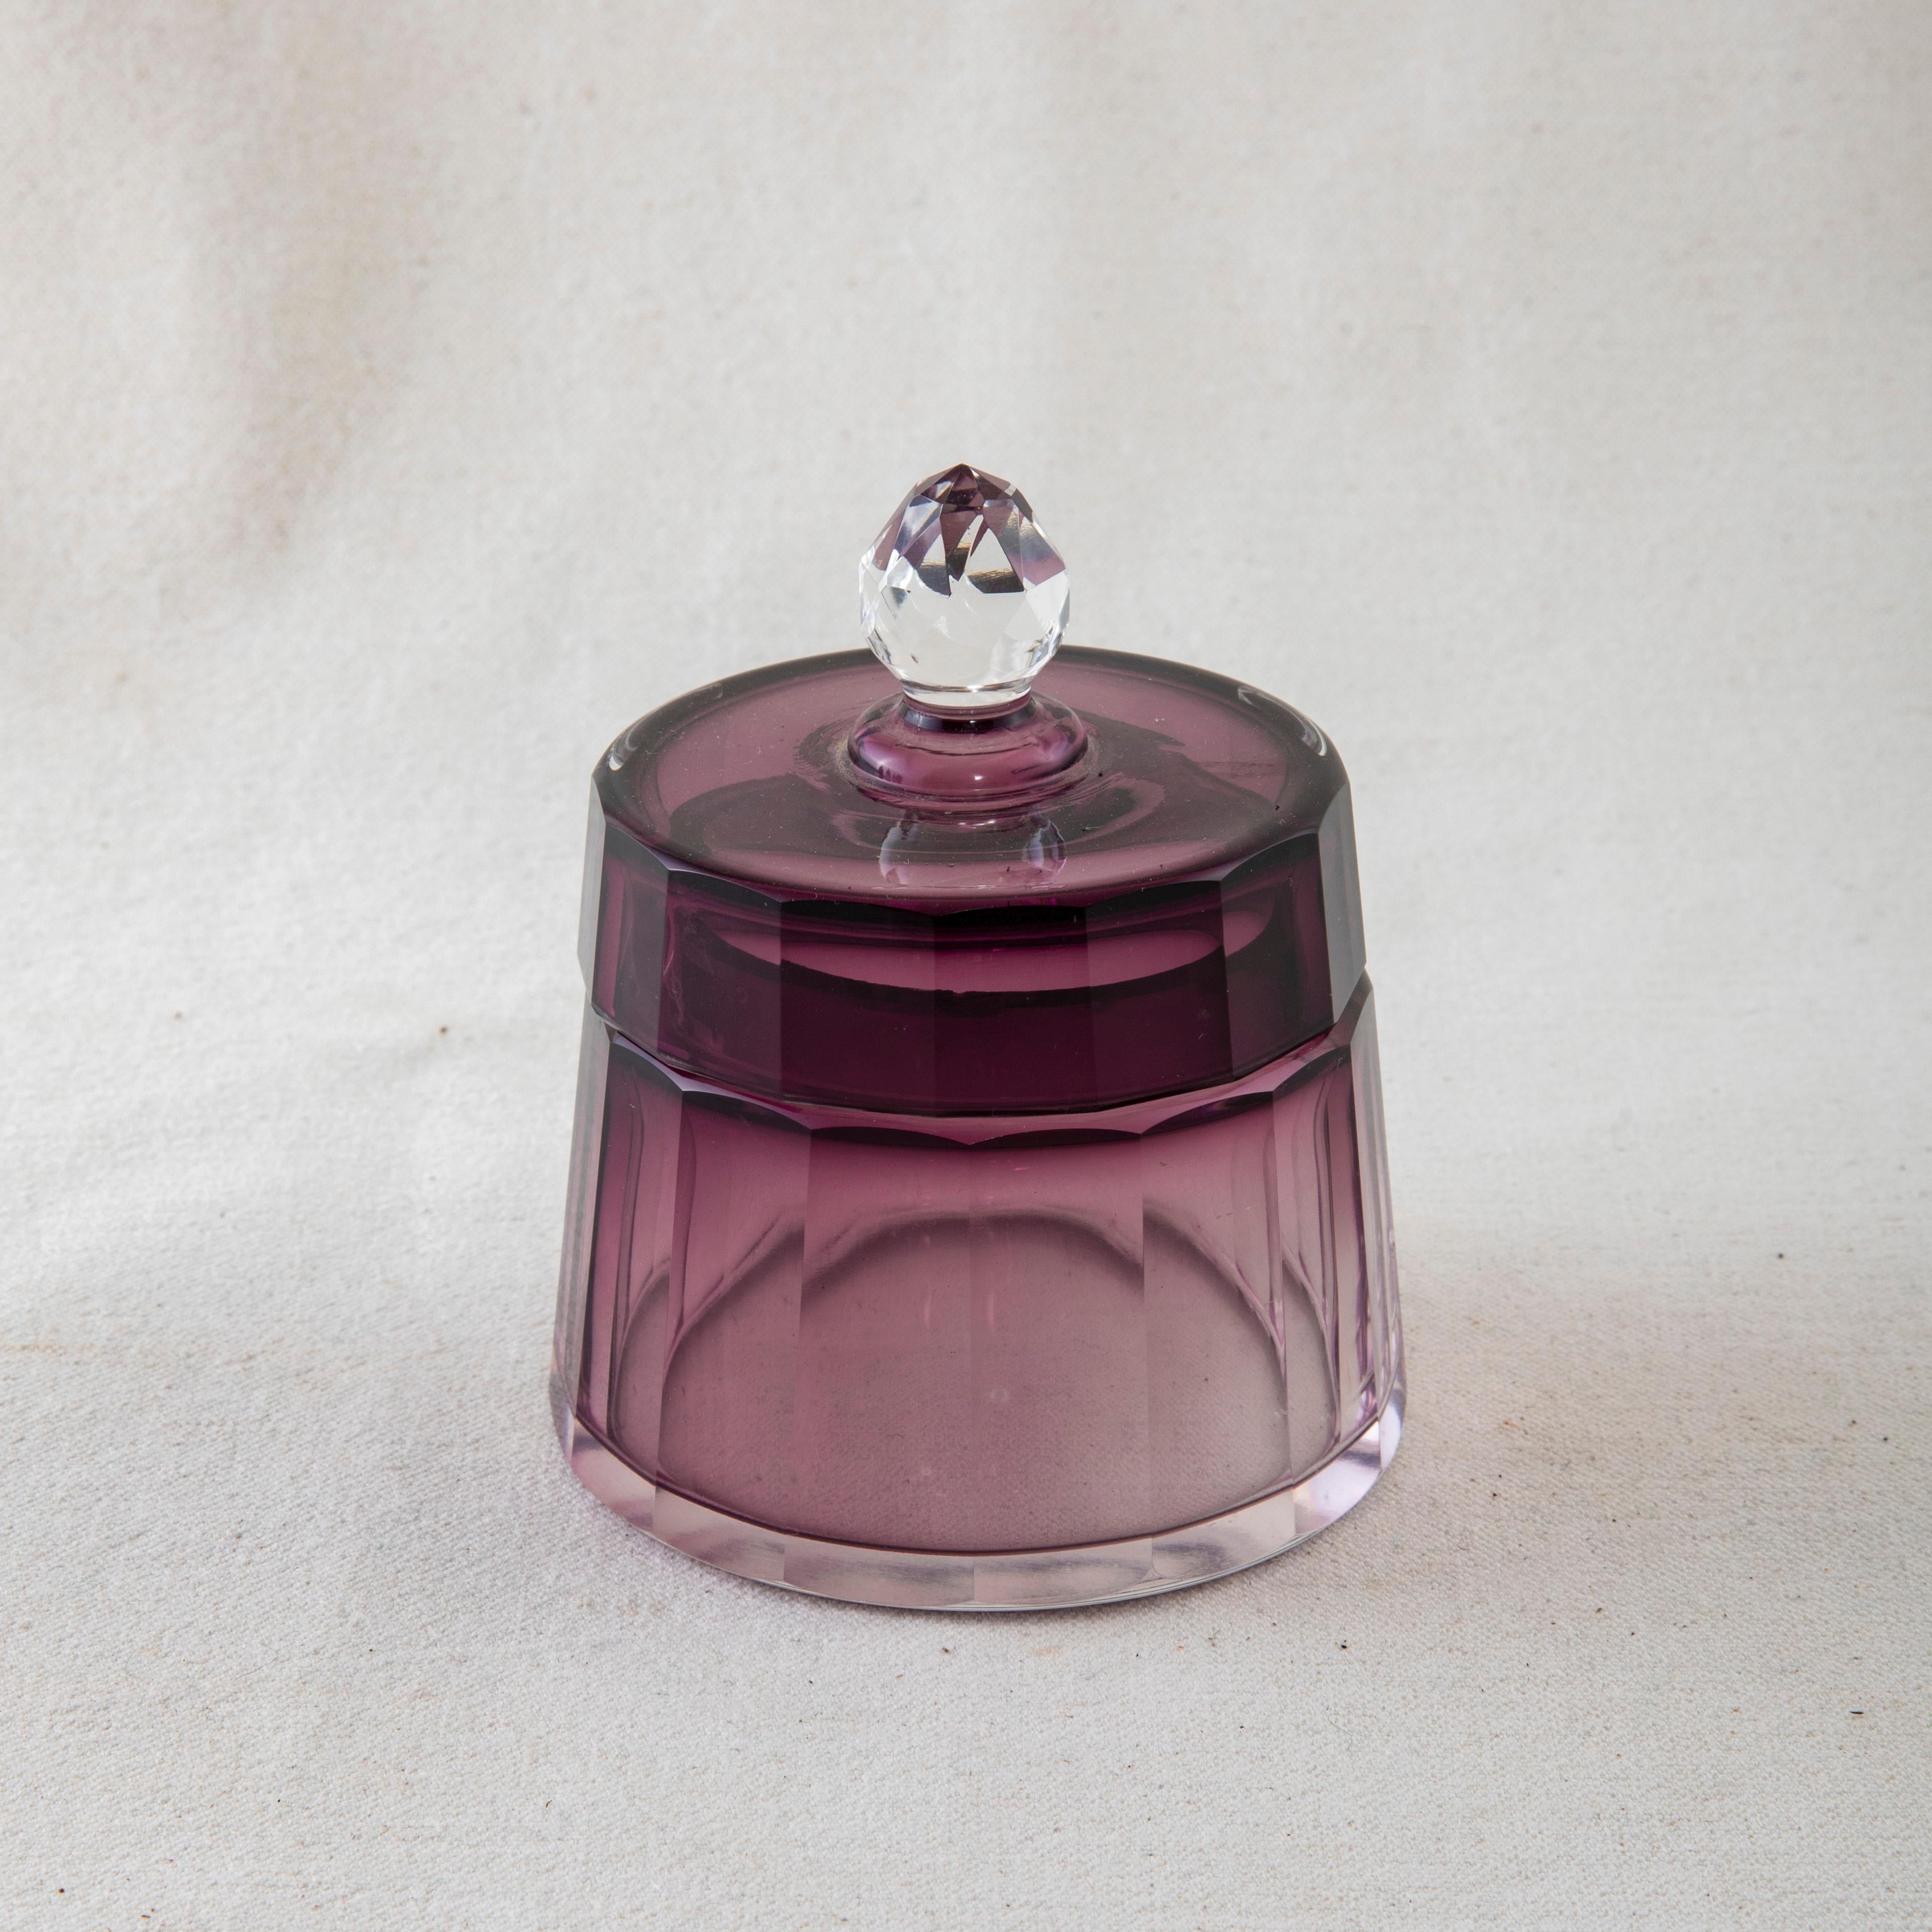 This set of five early twentieth century crystal vanity bottles features an amethyst gradient on the faceted facades. This set includes a perfume atomizer, three bottles with faceted stoppers, and one jar with lid. The bottles range in heights from